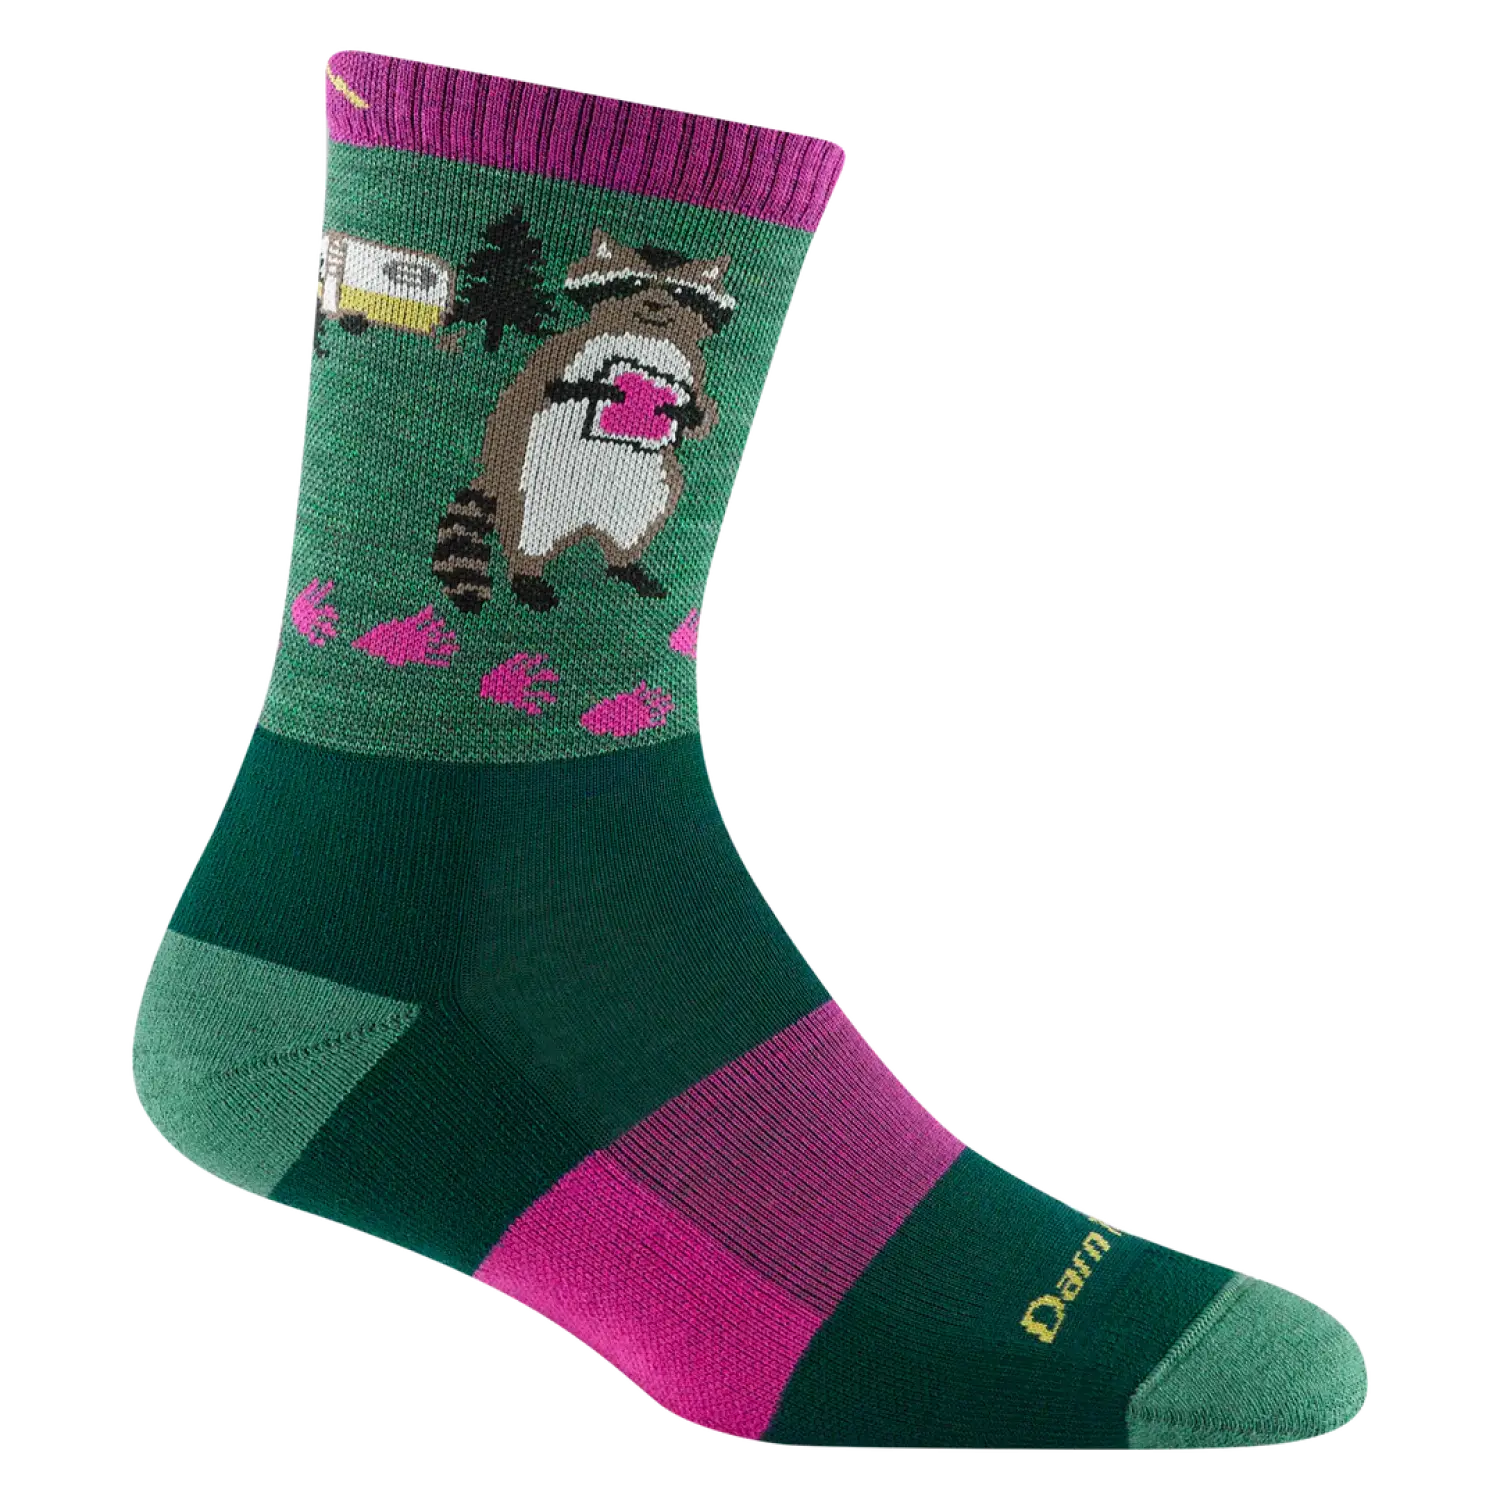 Darn Tough Women's Critter Club Micro Crew Lightweight Hiking Sock shown in the Moss color option.